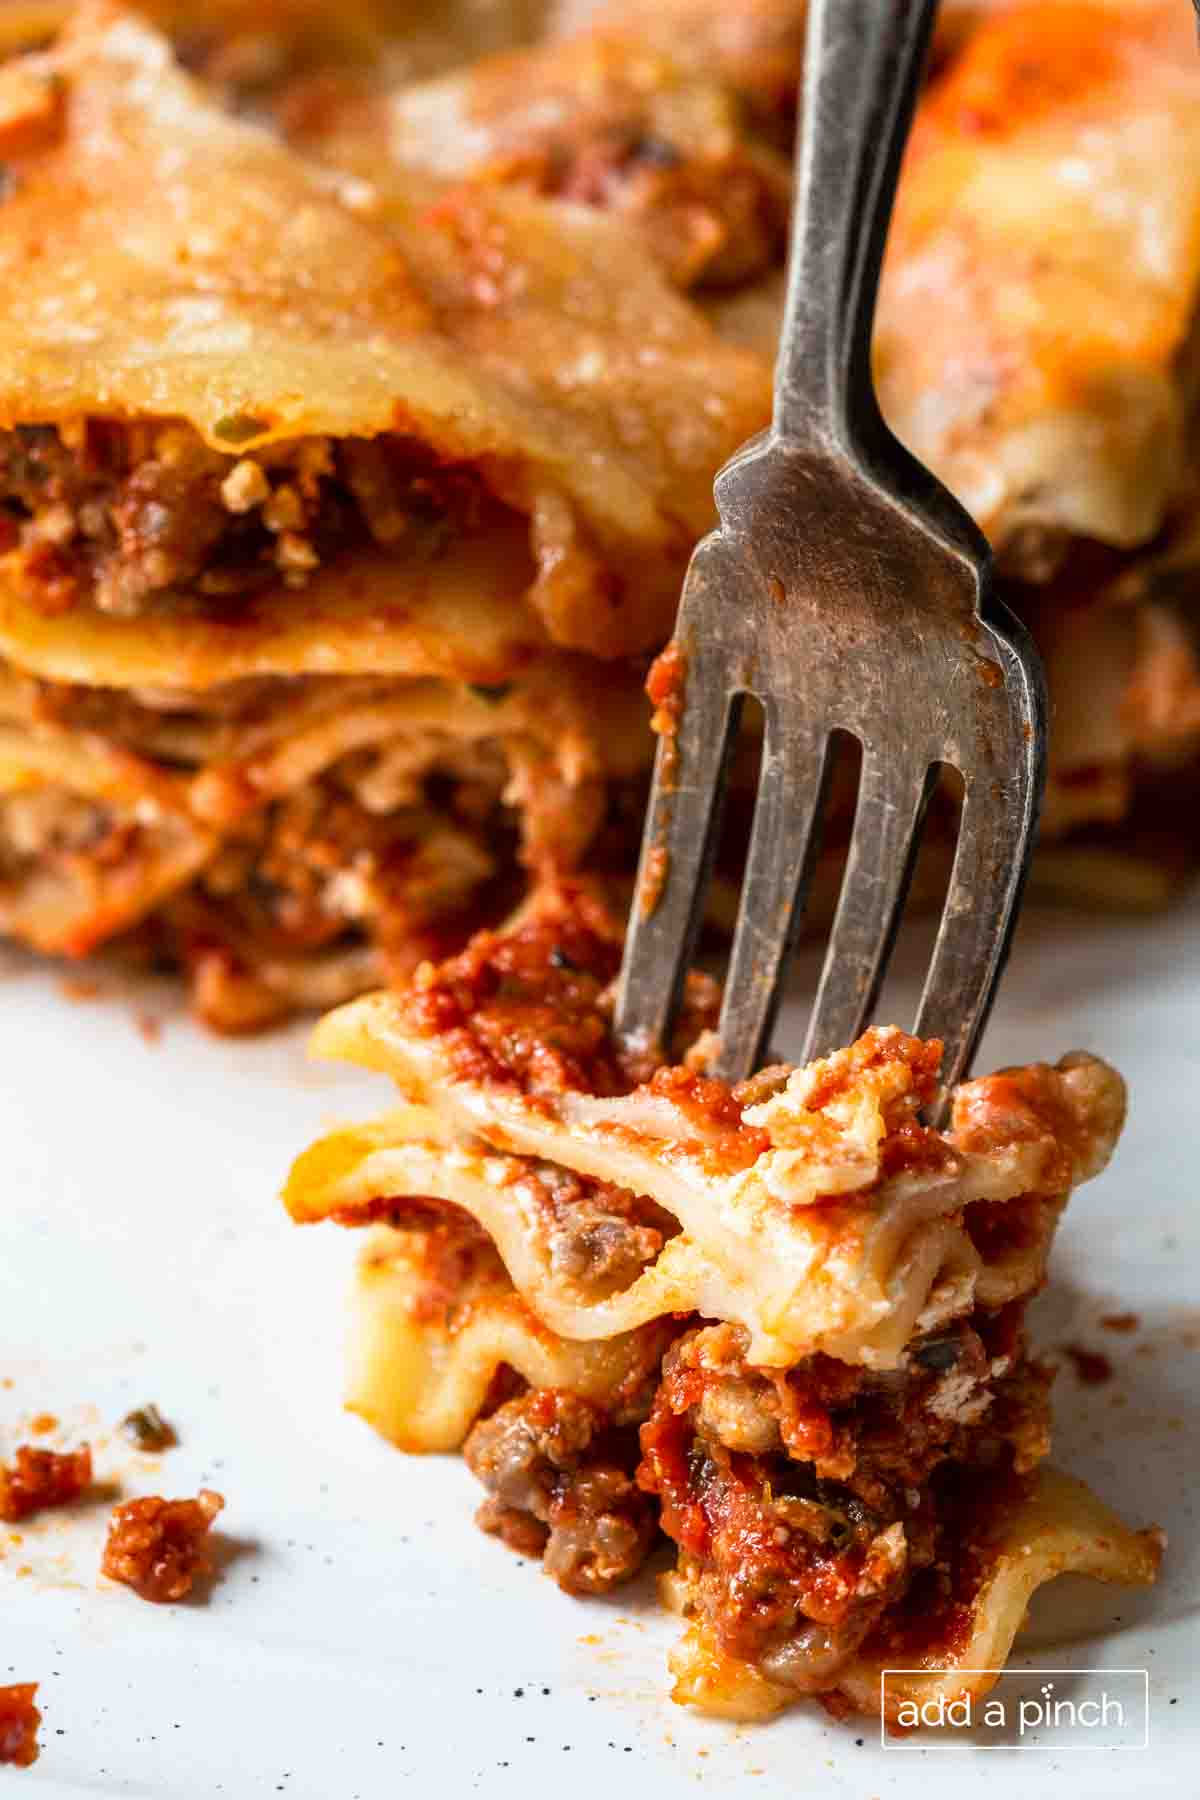 Photograph of a bite of cooked lasagna on a fork with piece of lasagna in the background.